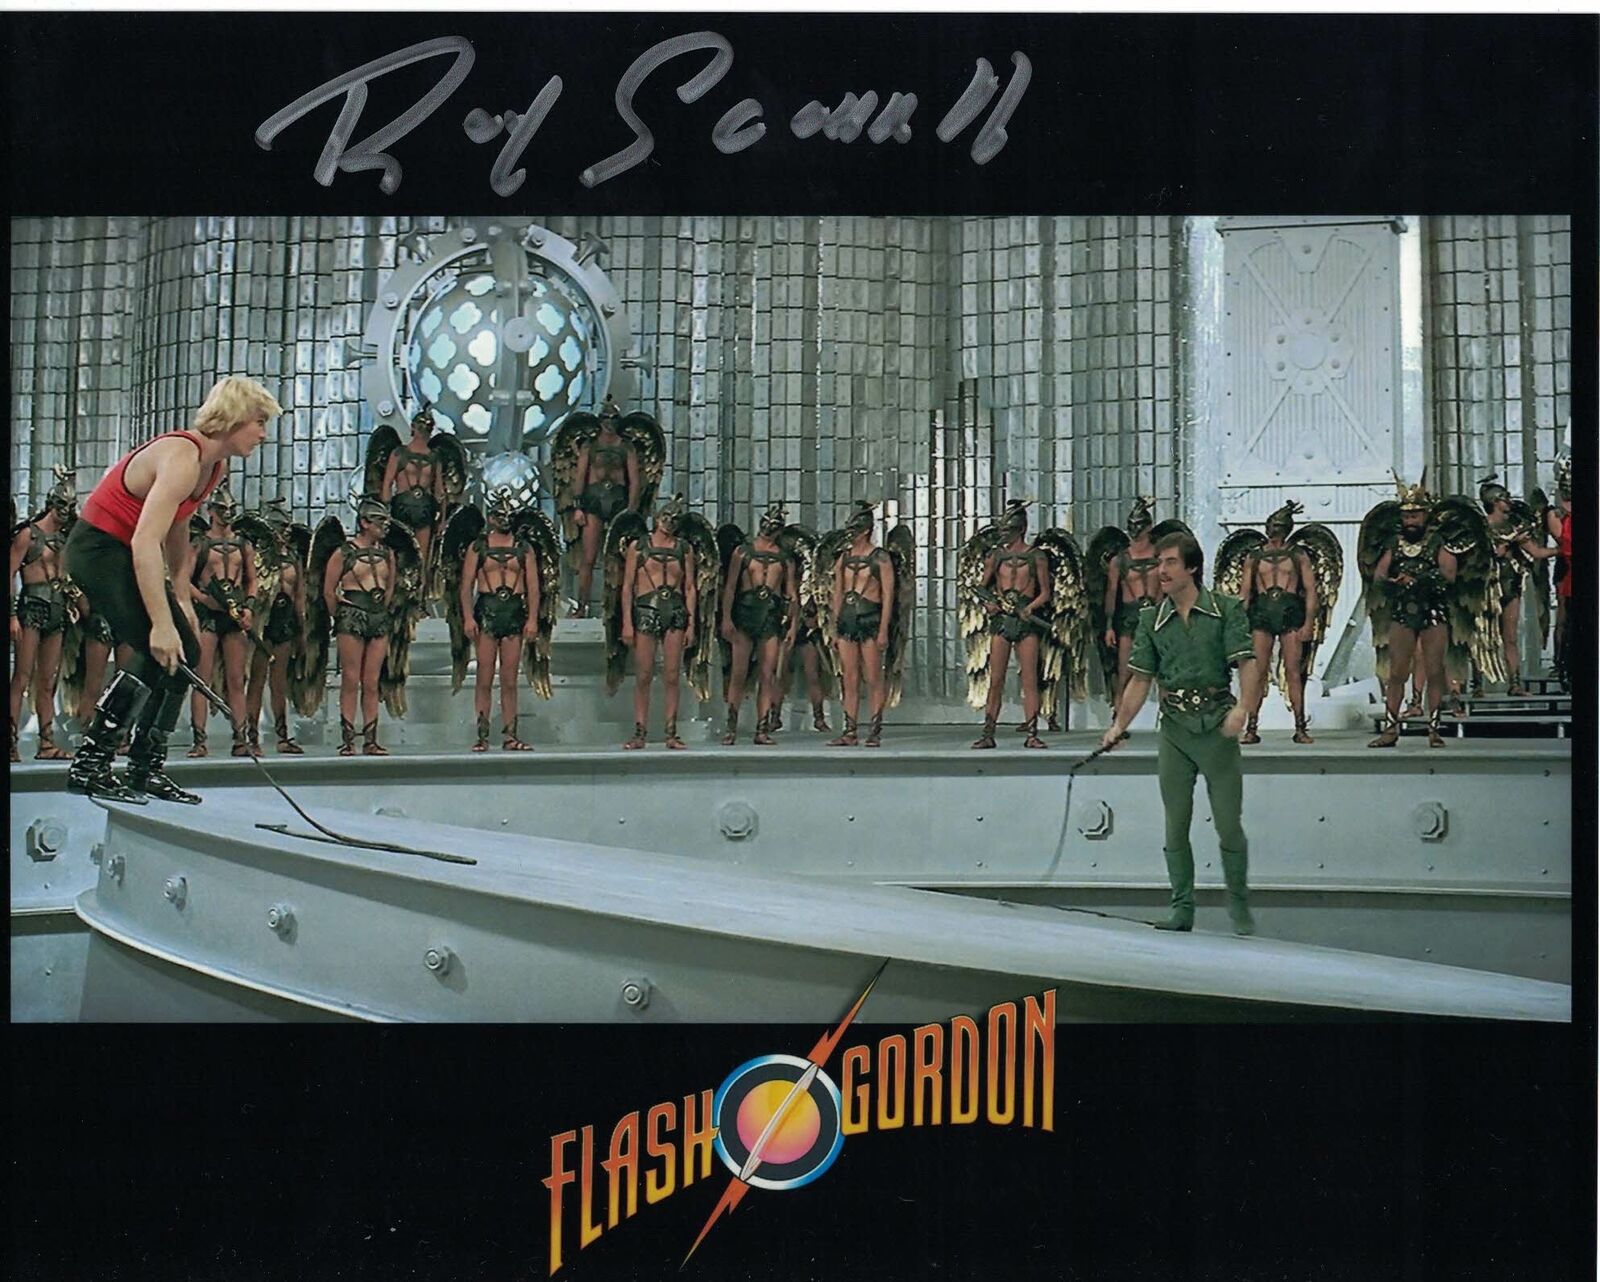 ROY SCAMMELL - Hawkman in Flash Gordon- hand signed 10 x 8 Photo Poster painting